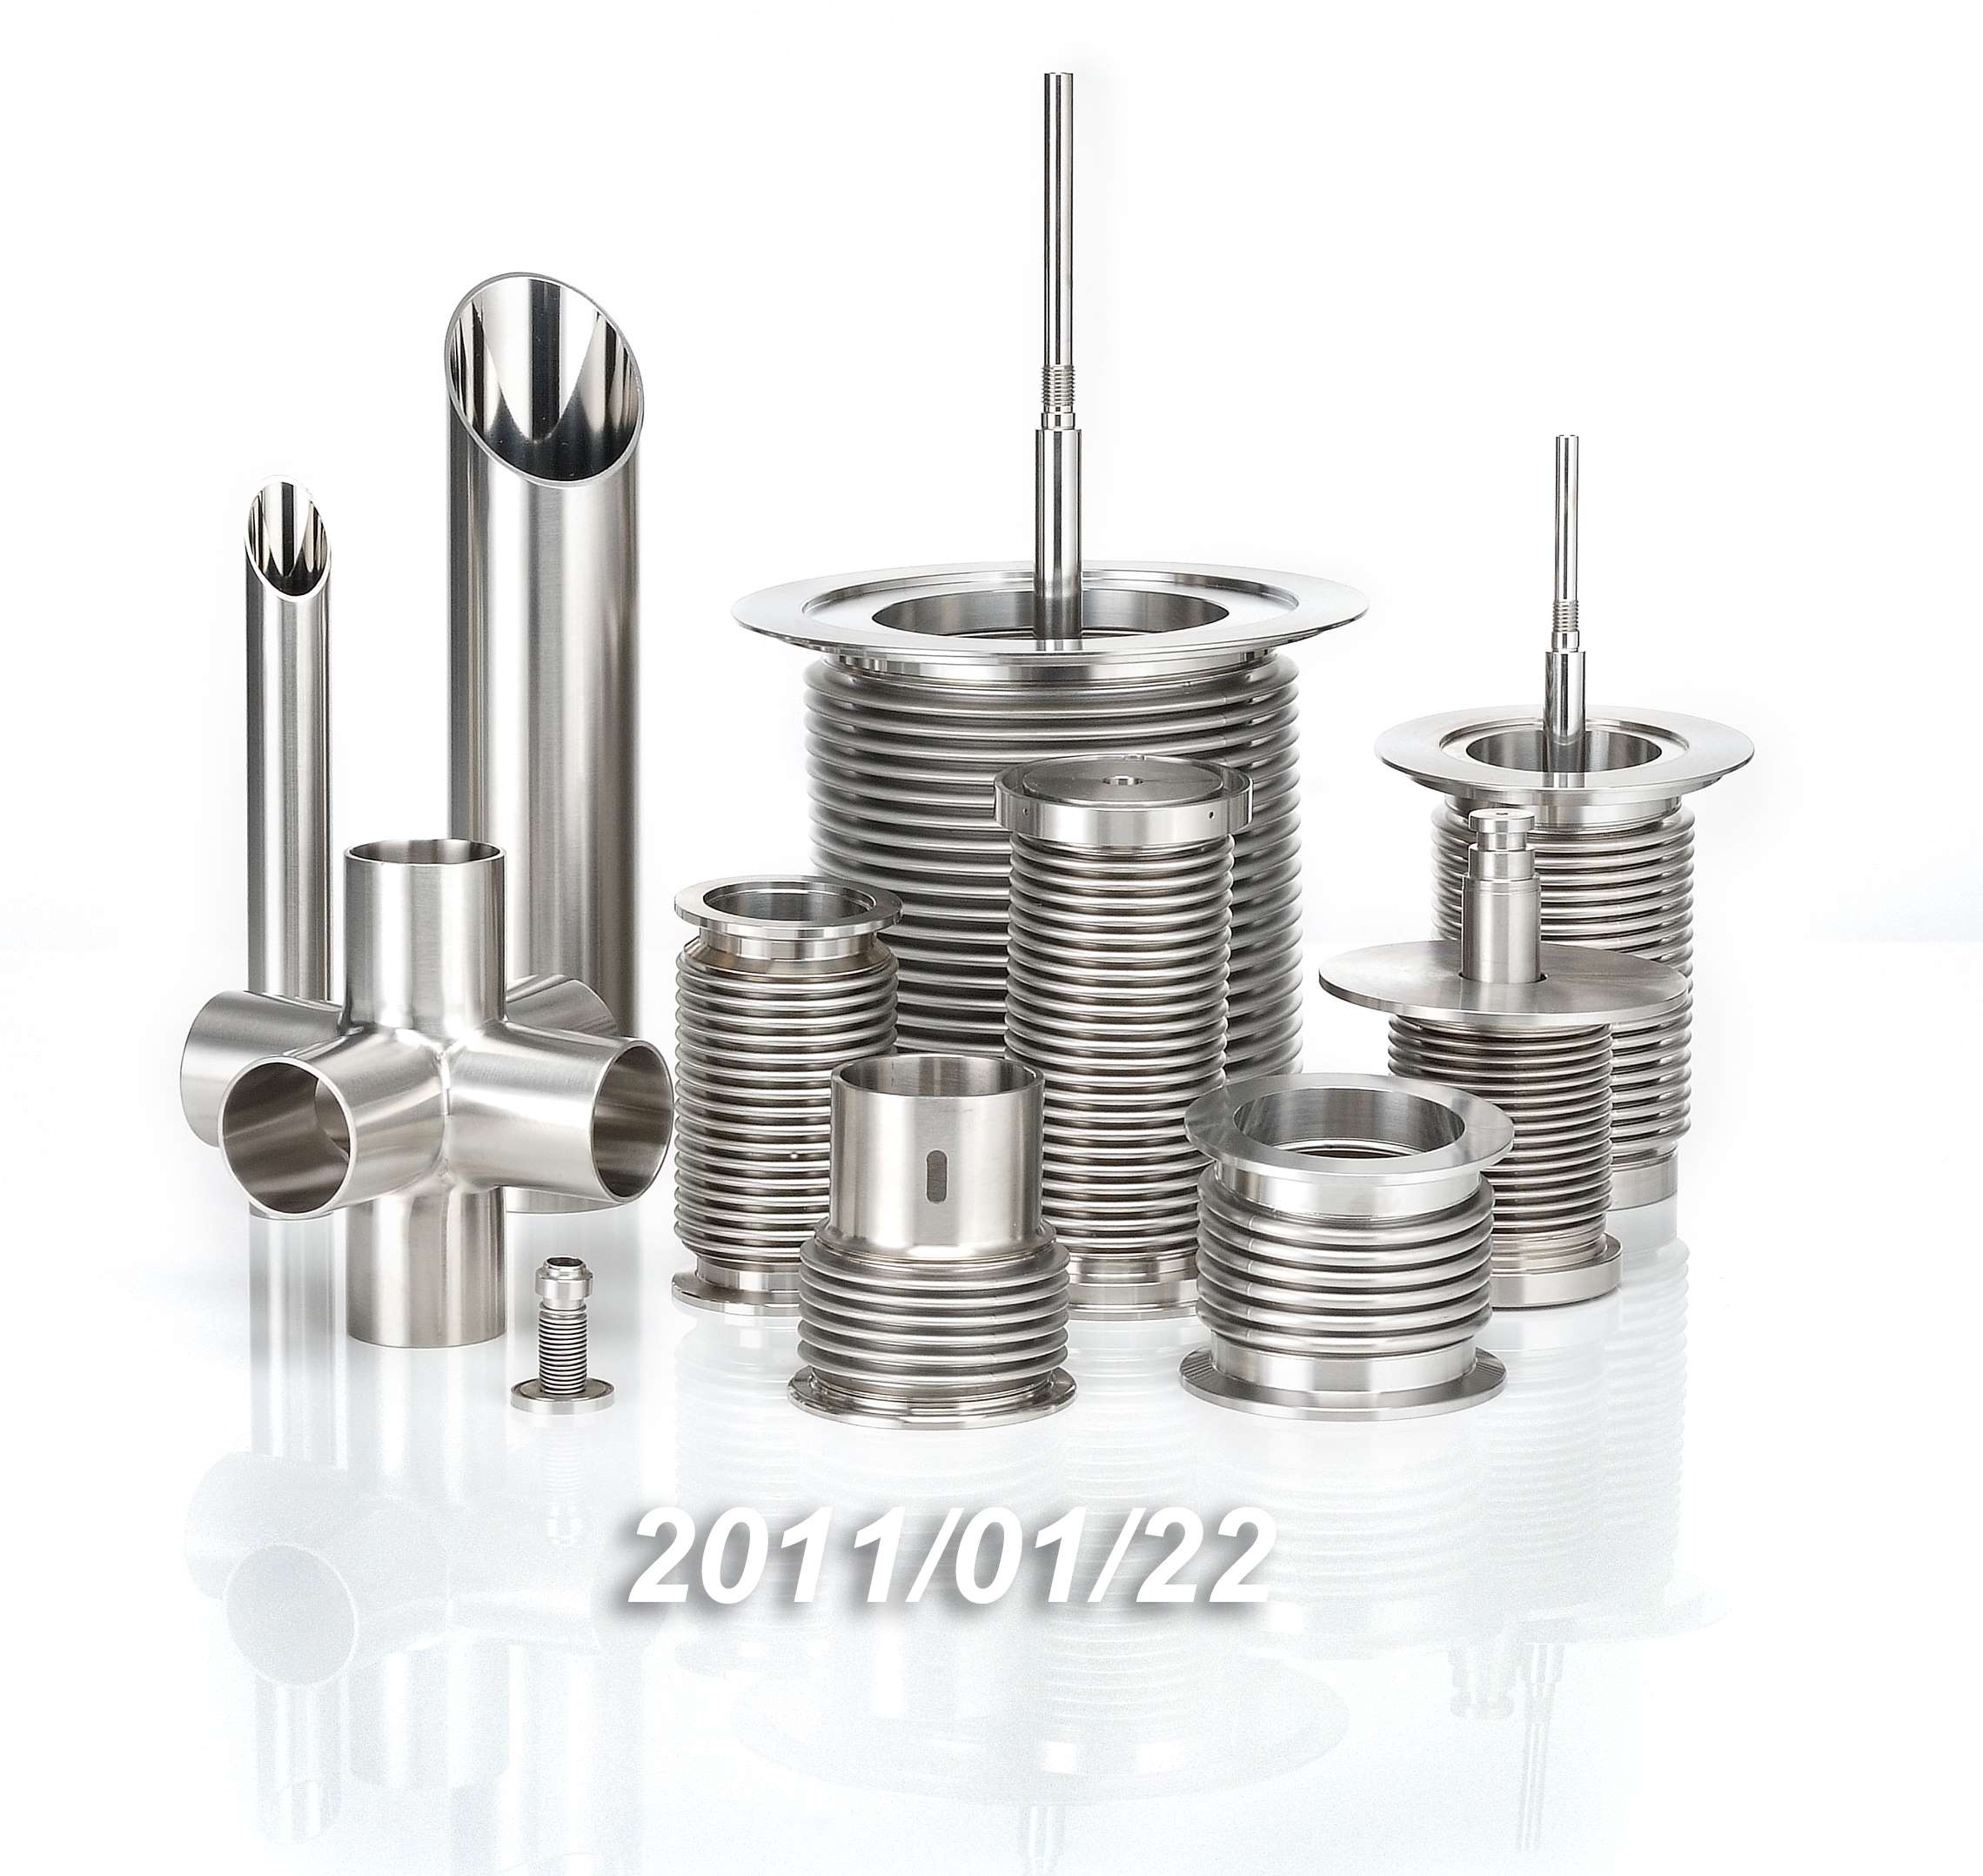 Qualified Connector Manufacturer and Supplier